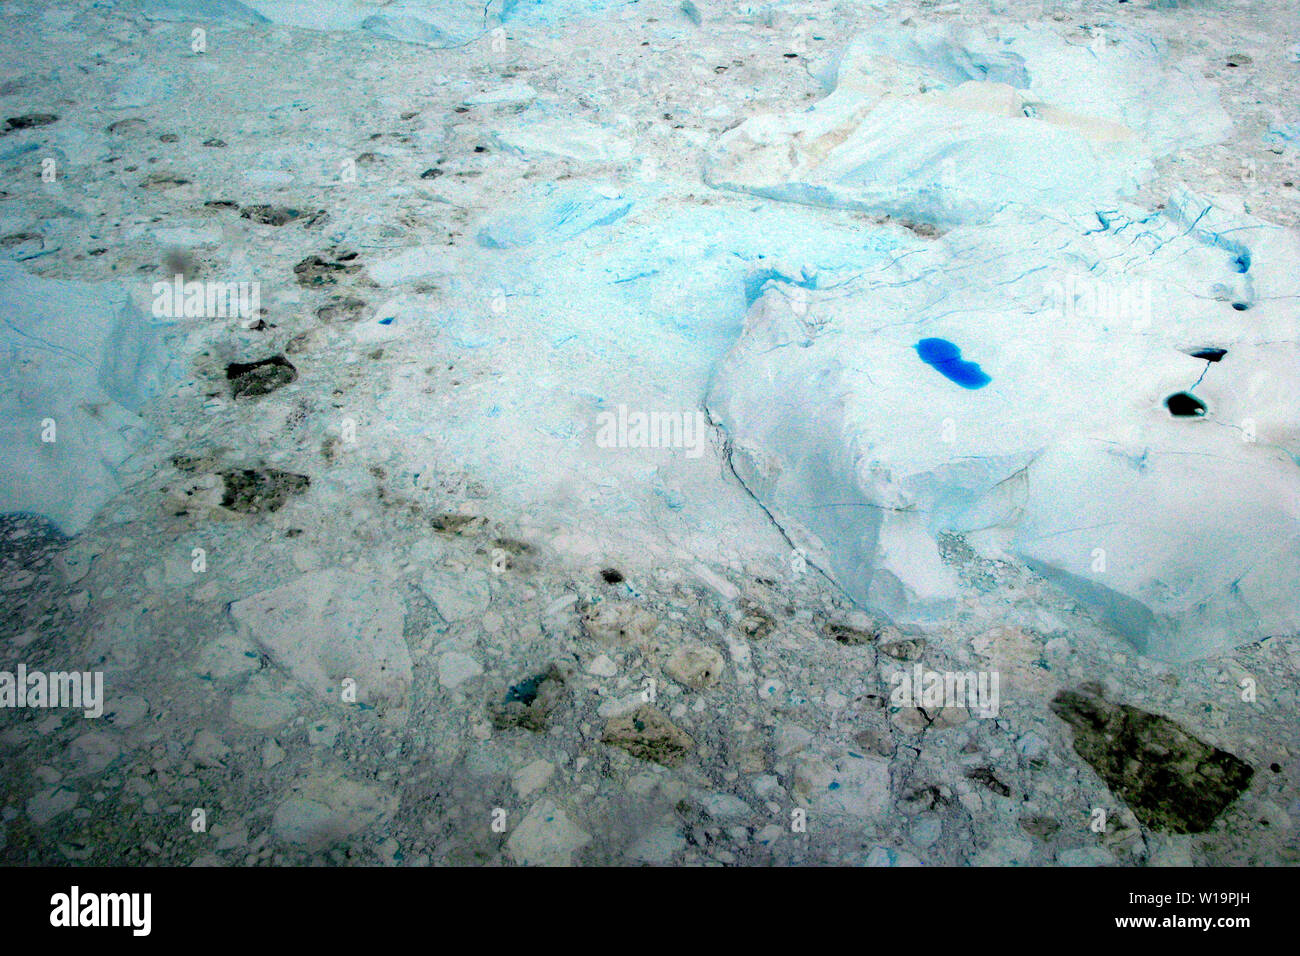 Sea ice in the Disko Bay. The National Geographic Society released on August 3rd 2015 a new map depicting a radical loss of ice in the Arctic. Check it out for yourself at http://news.nationalgeographic.com/2015/08/150803-arctic-ice-obama-climate-nation-science/. According to researchers at the Danish Meterological Institute nearly ten cubic kilometres of ice melts every day from the Greenland Ice sheet, dumping freshwater into the ocean. The ice sheet plays an important role in cooling down the planet, as 90 percent of sunlight is reflected back out into the atmosphere. Losing the Greenland i Stock Photo